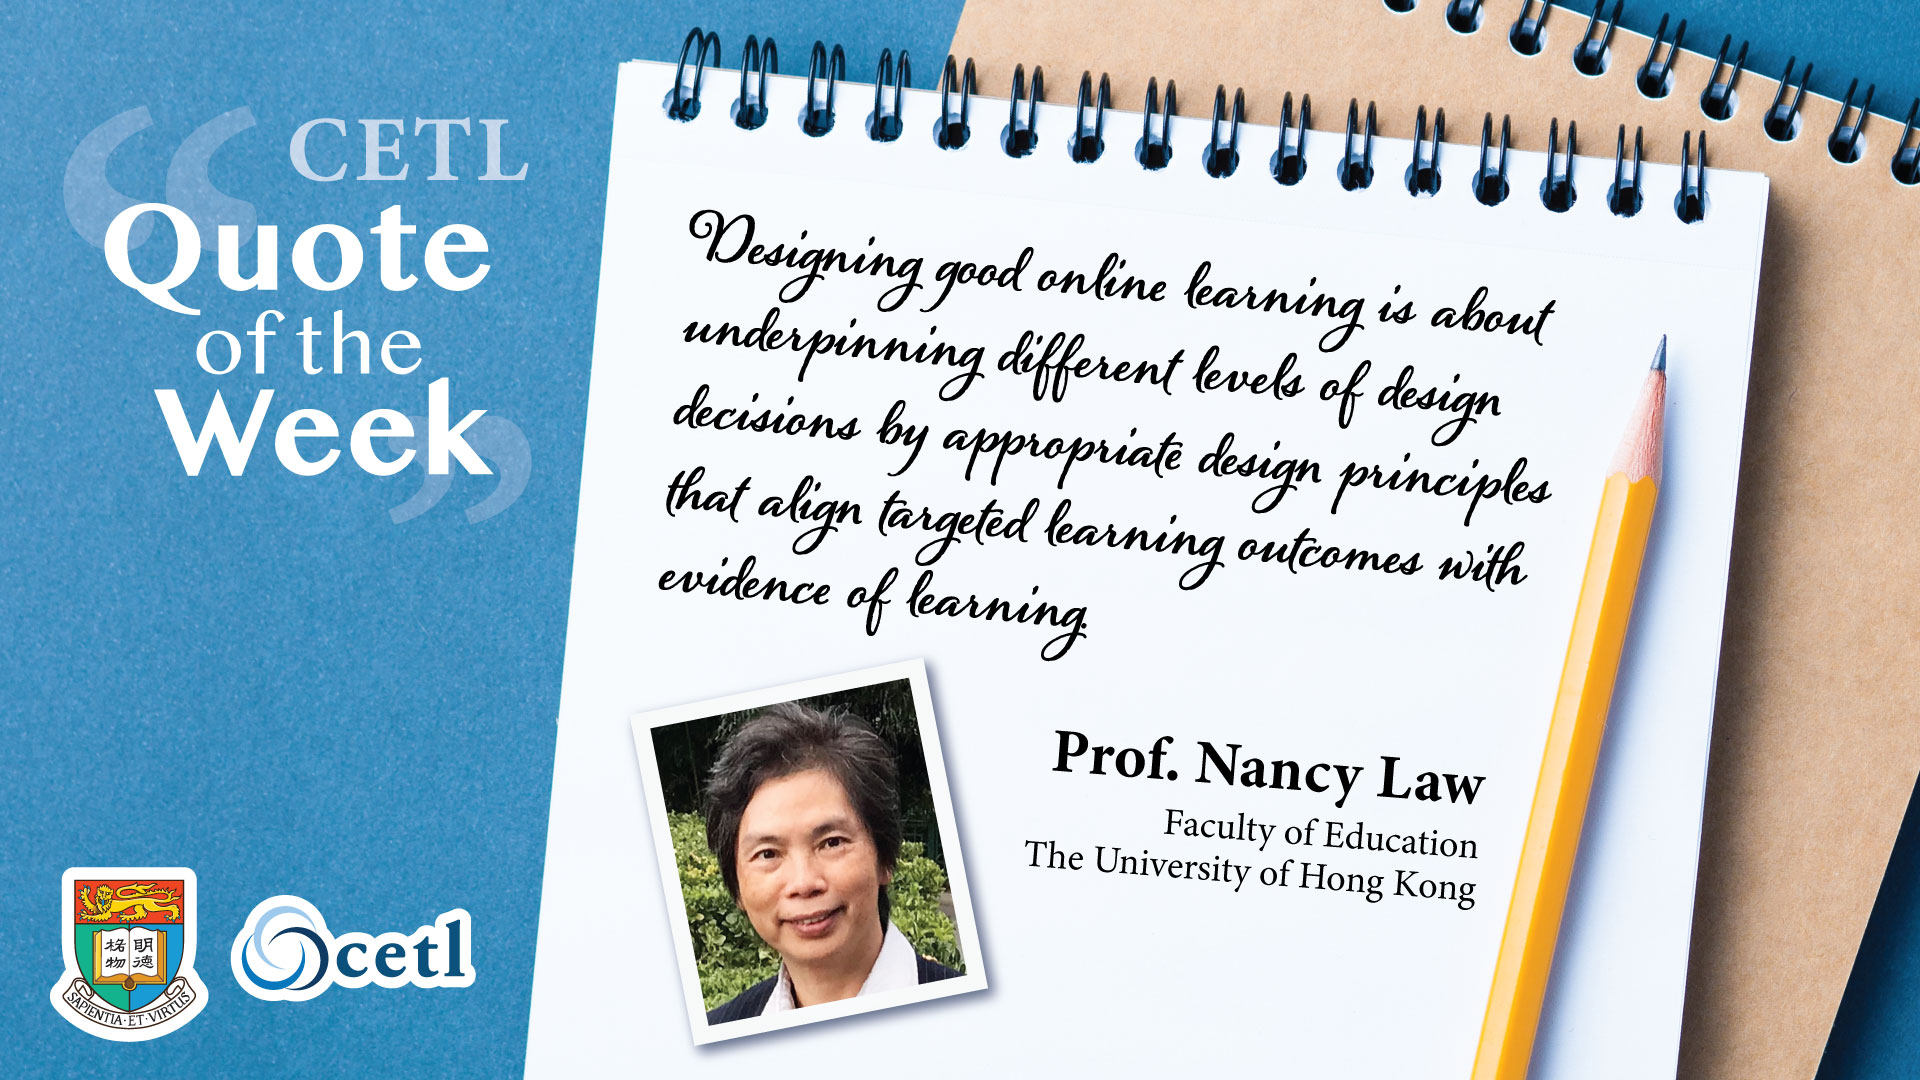 Prof. Nancy Law - Designing good online learning is about underpinning different levels of design decisions by appropriate design principles that align targeted learning outcomes with evidence of learning.